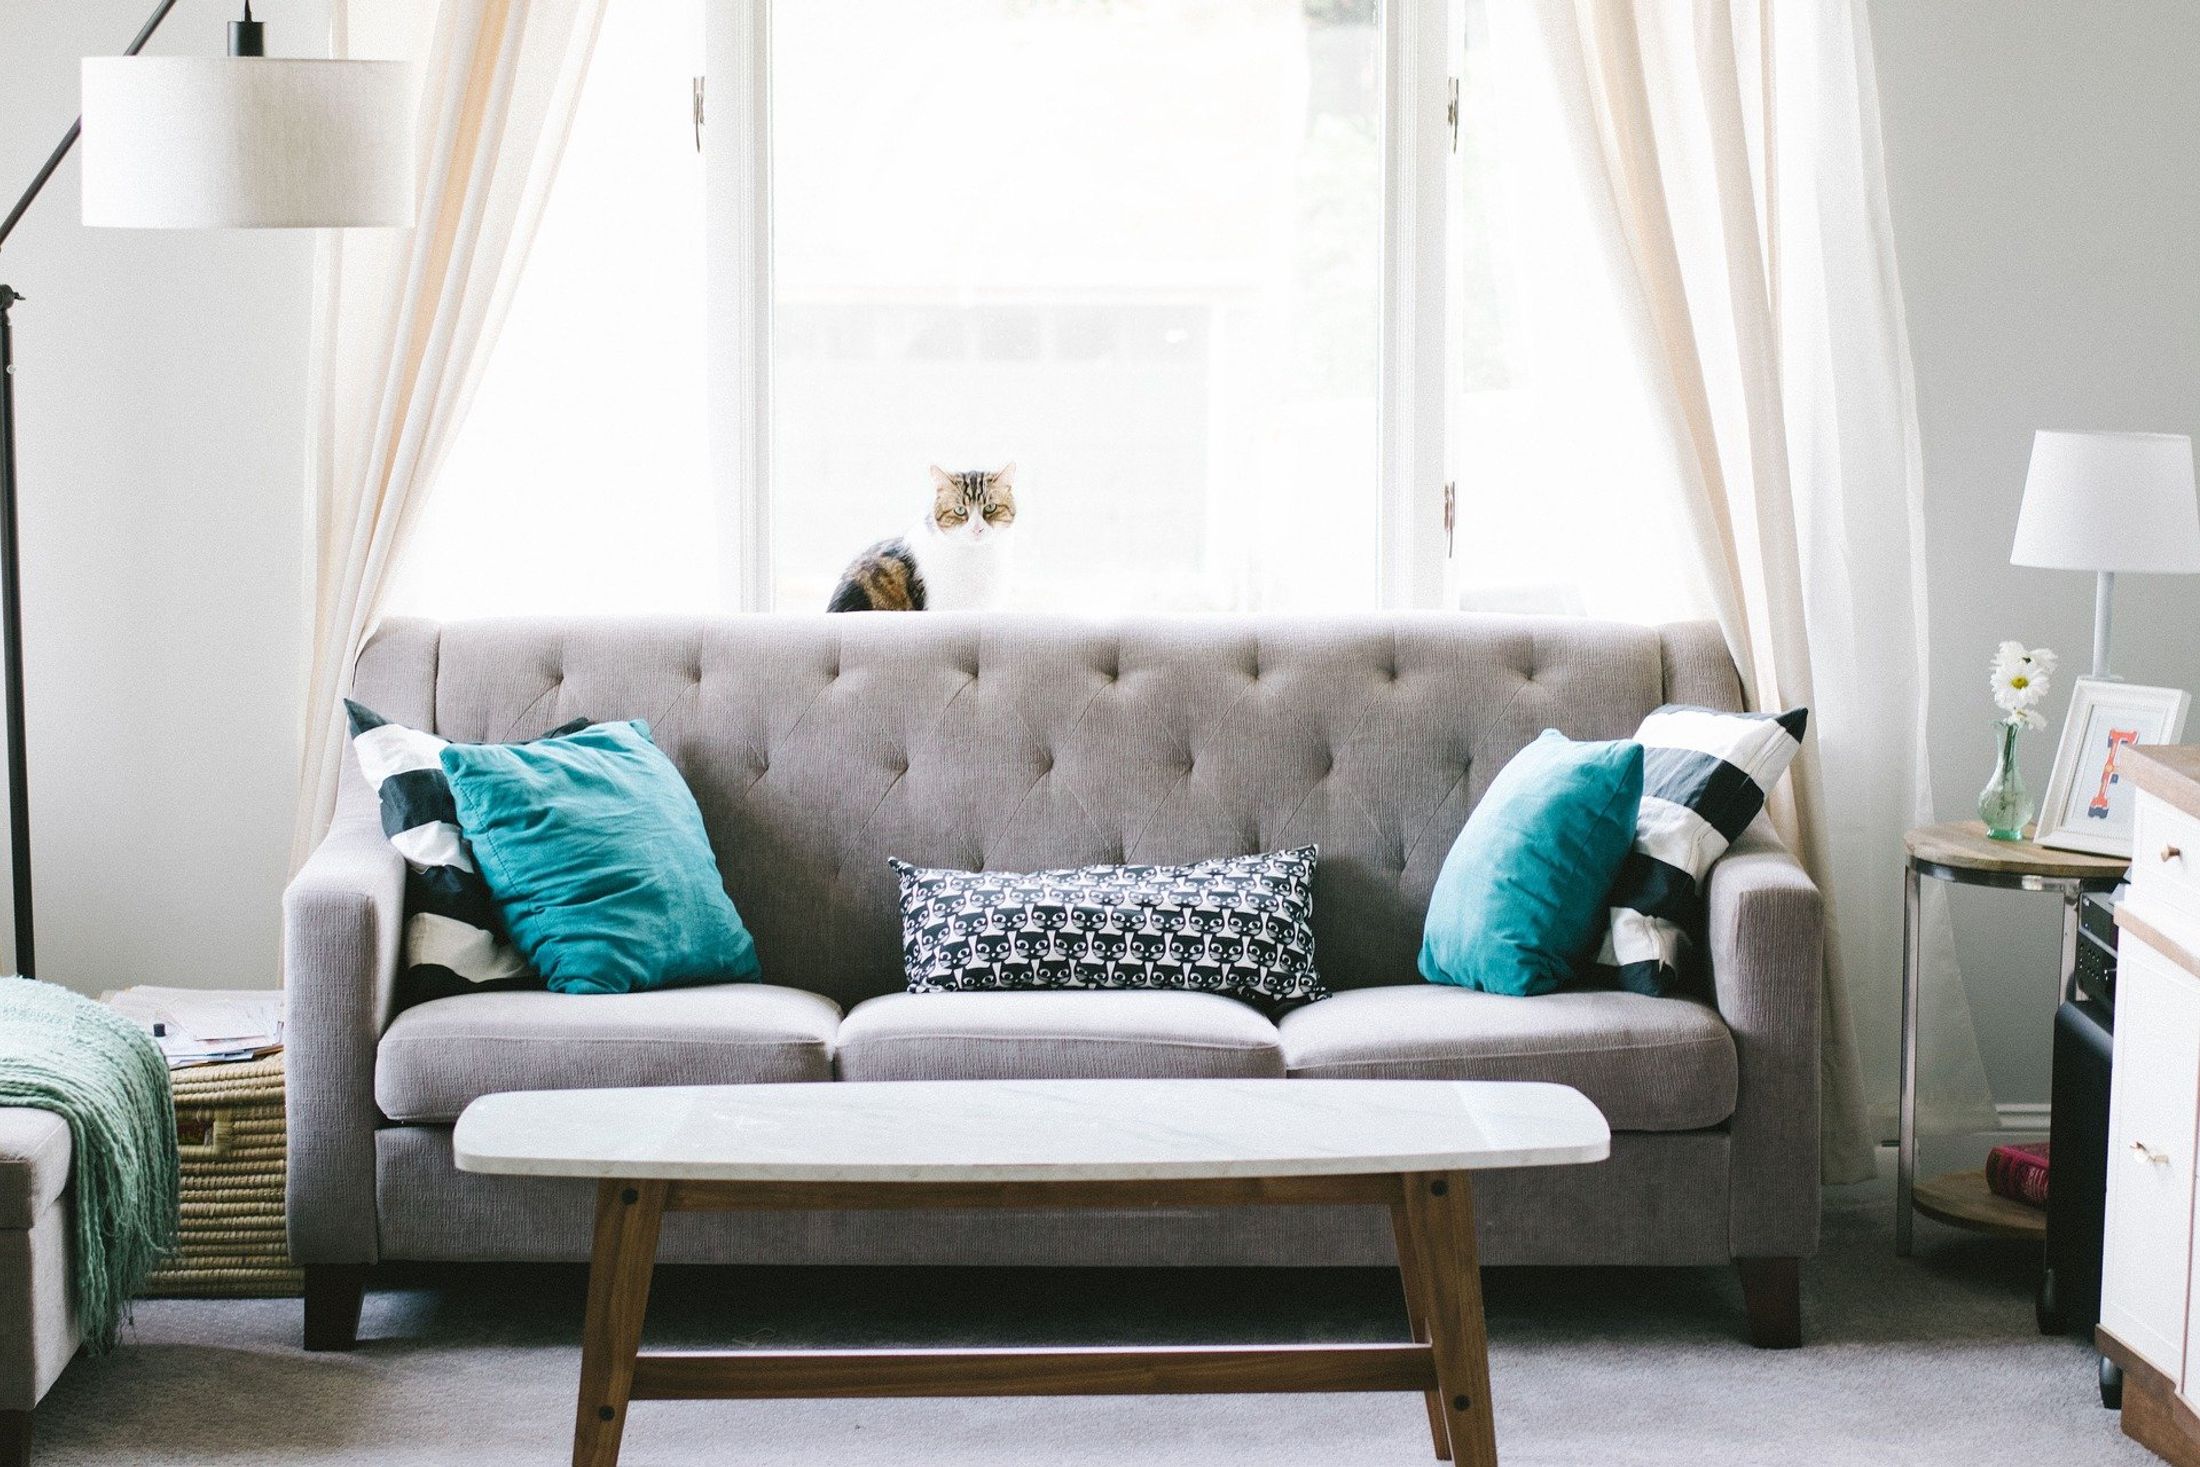 5 Easy Ways to Stop Furniture From Sliding on Wood Floors